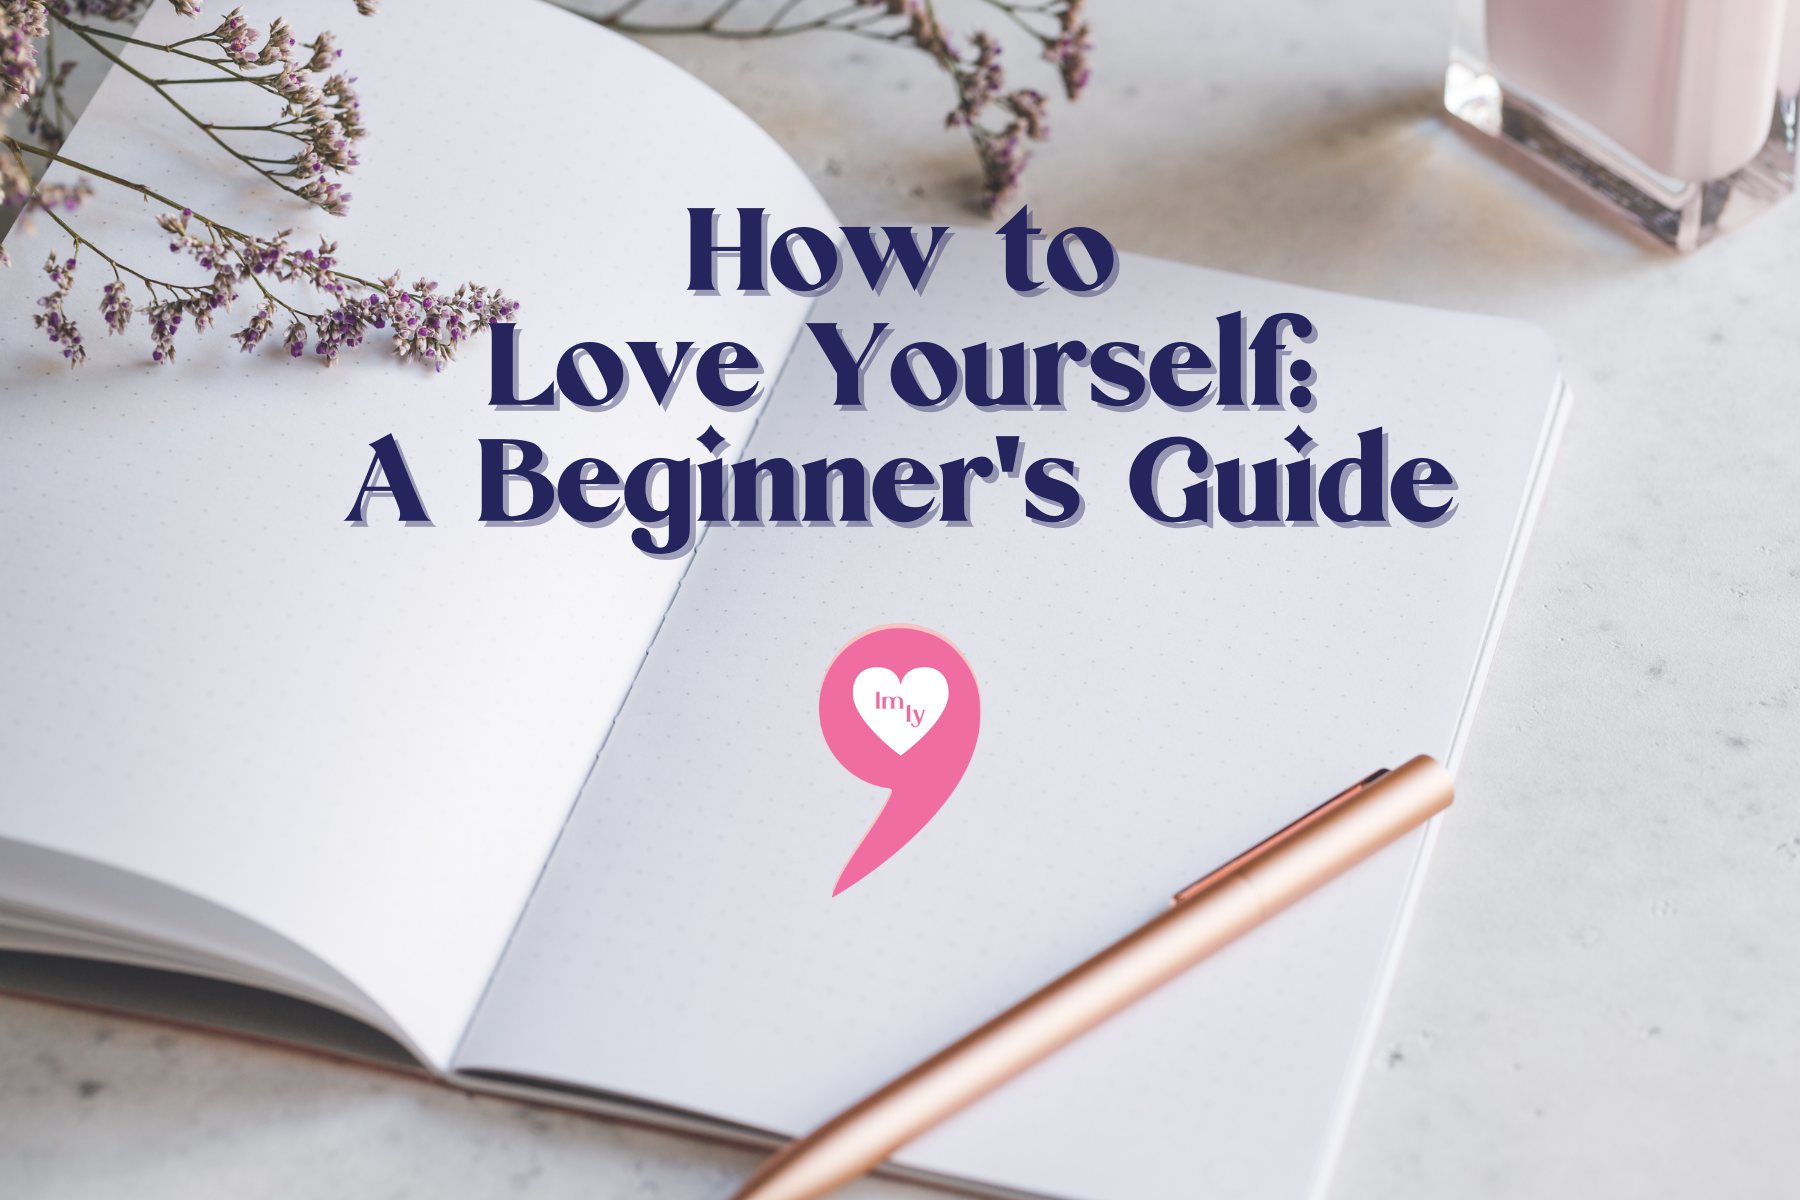 Guide to self-love